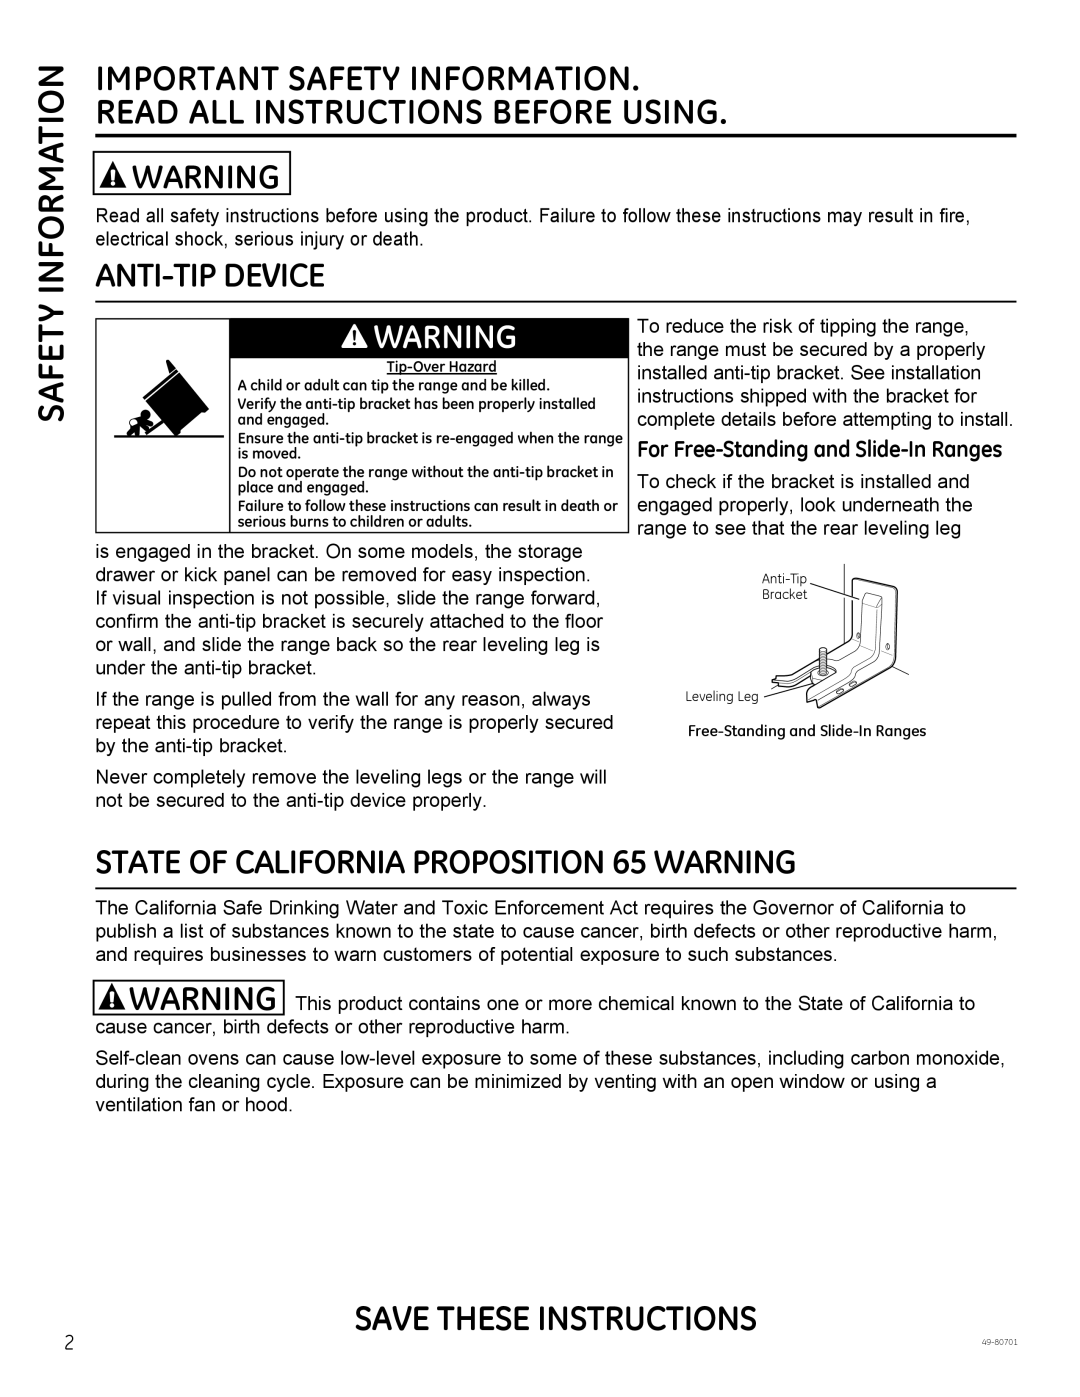 GE PB950 Important Safety Information Read All Instructions Before Using, Save These Instructions, Anti-Tip Device 